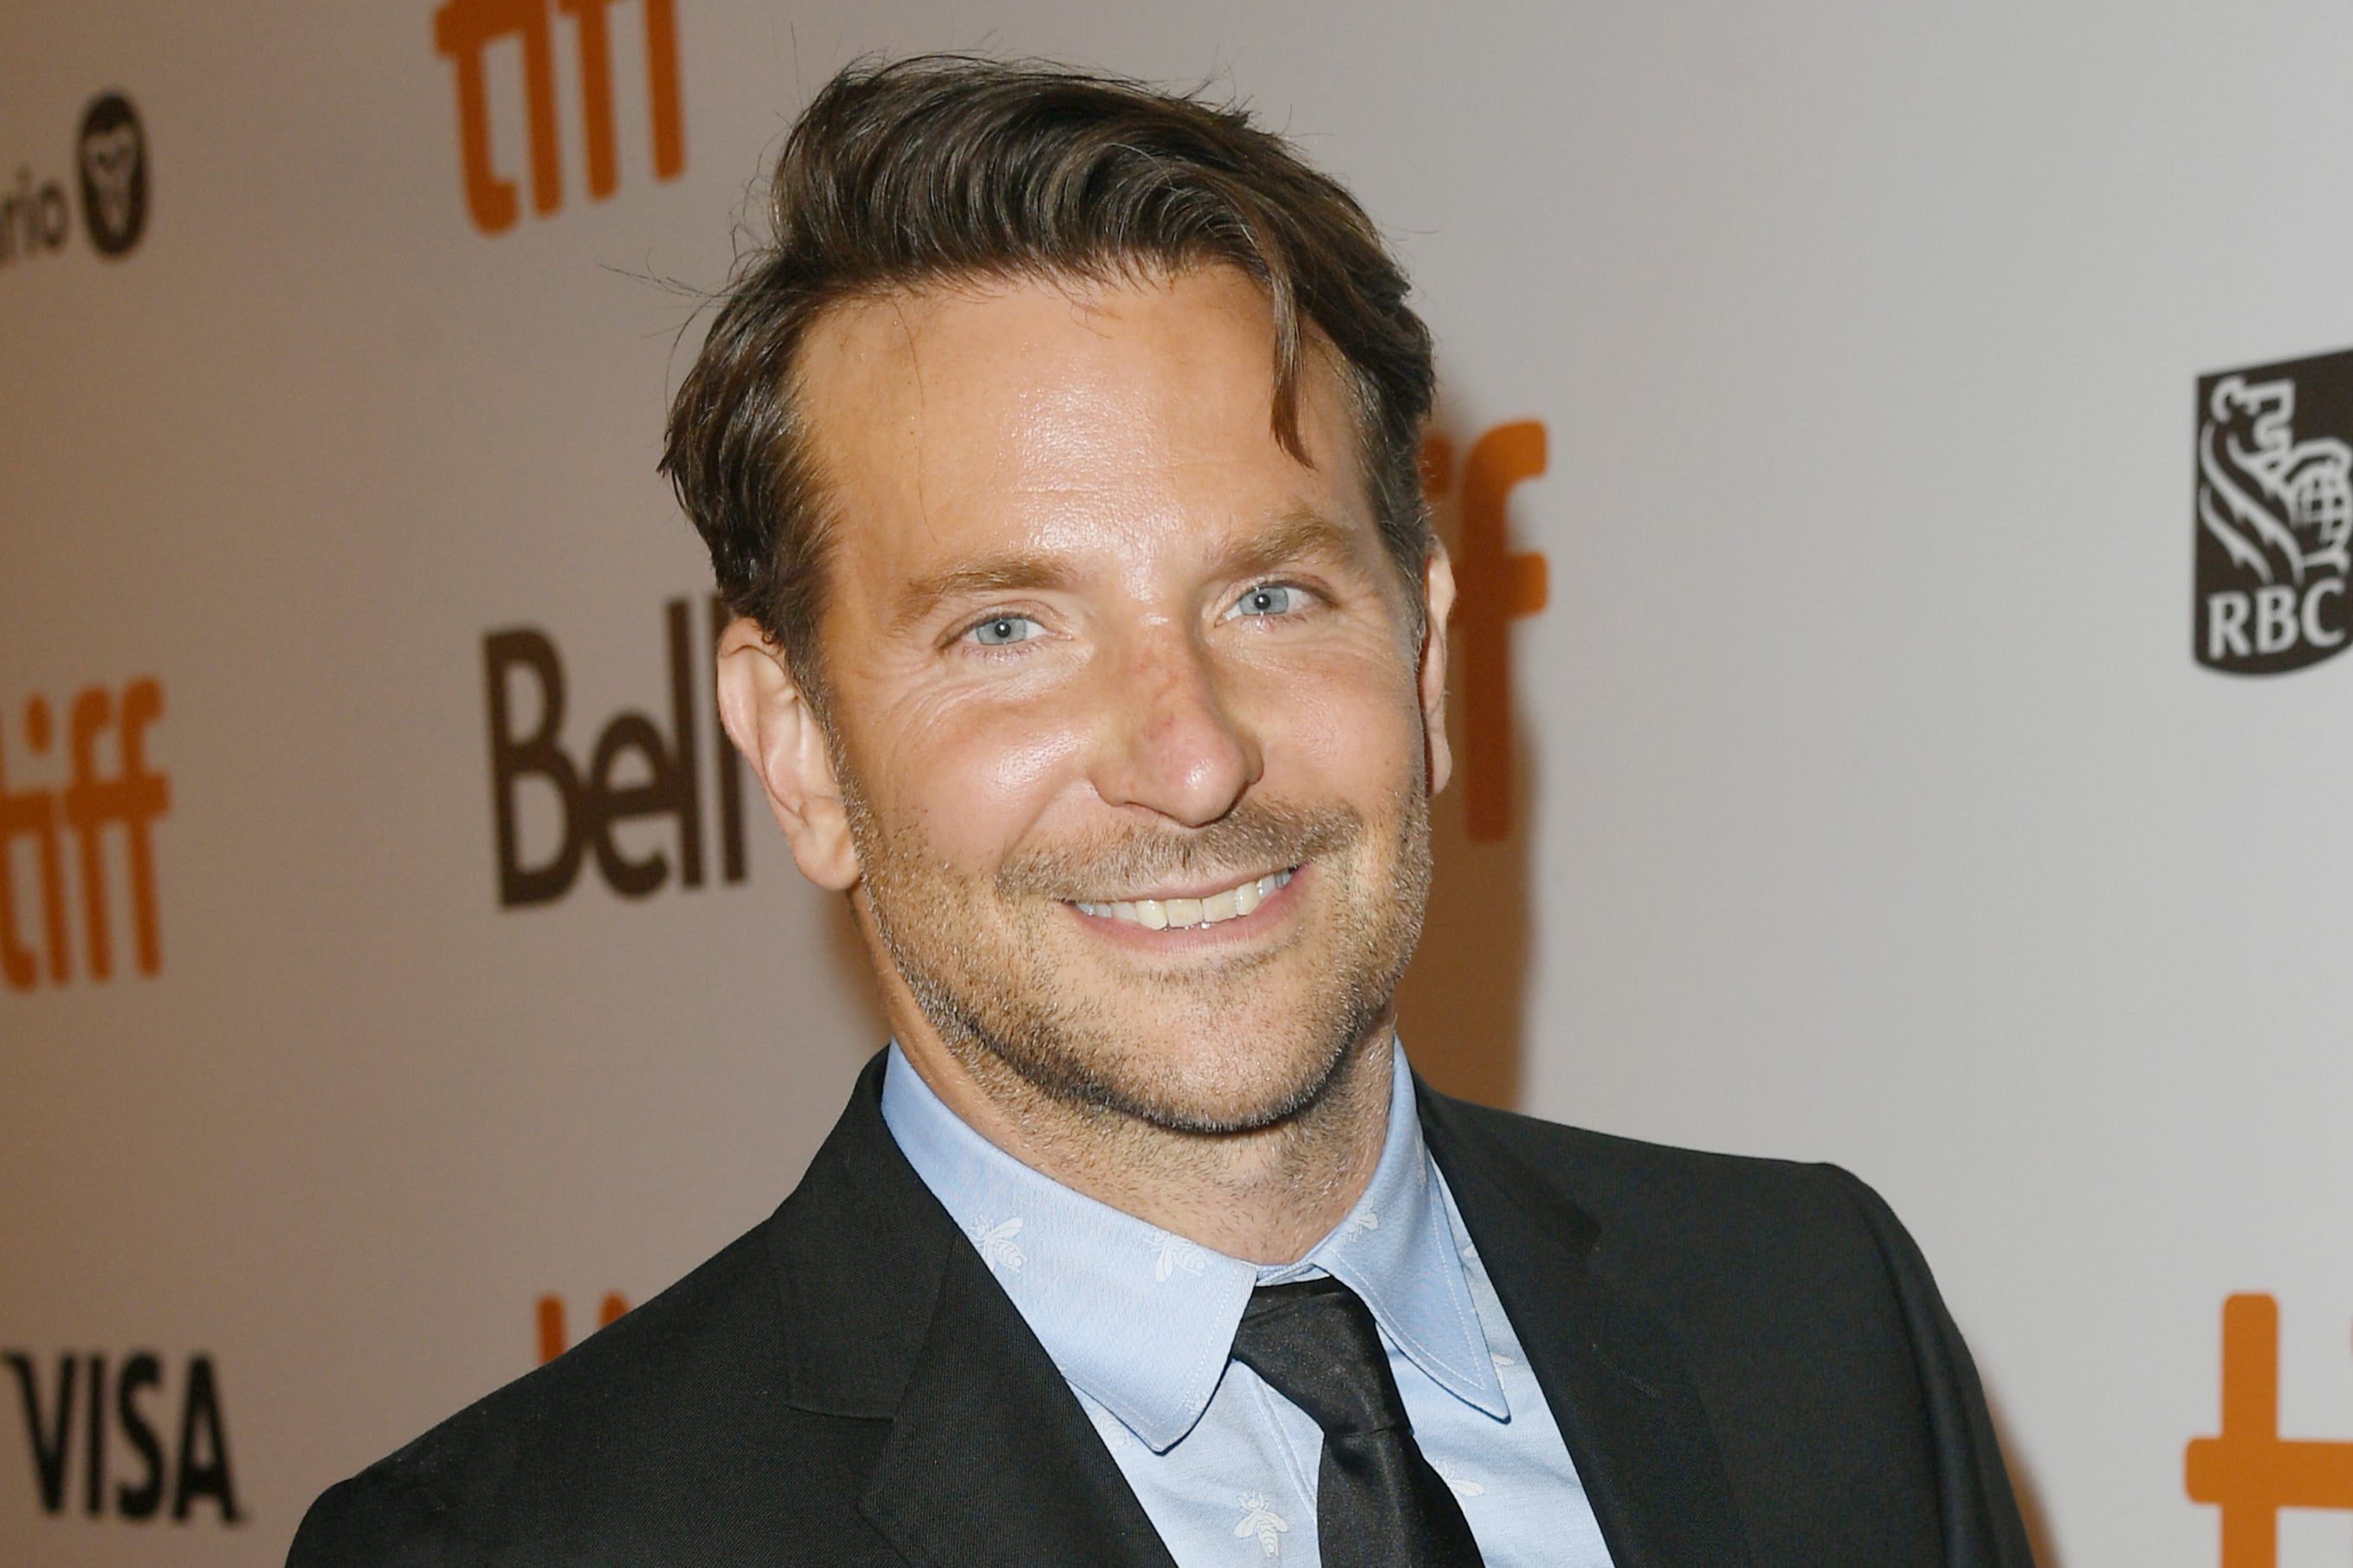 Bradley Cooper: From addiction and self-loathing to nine Oscar